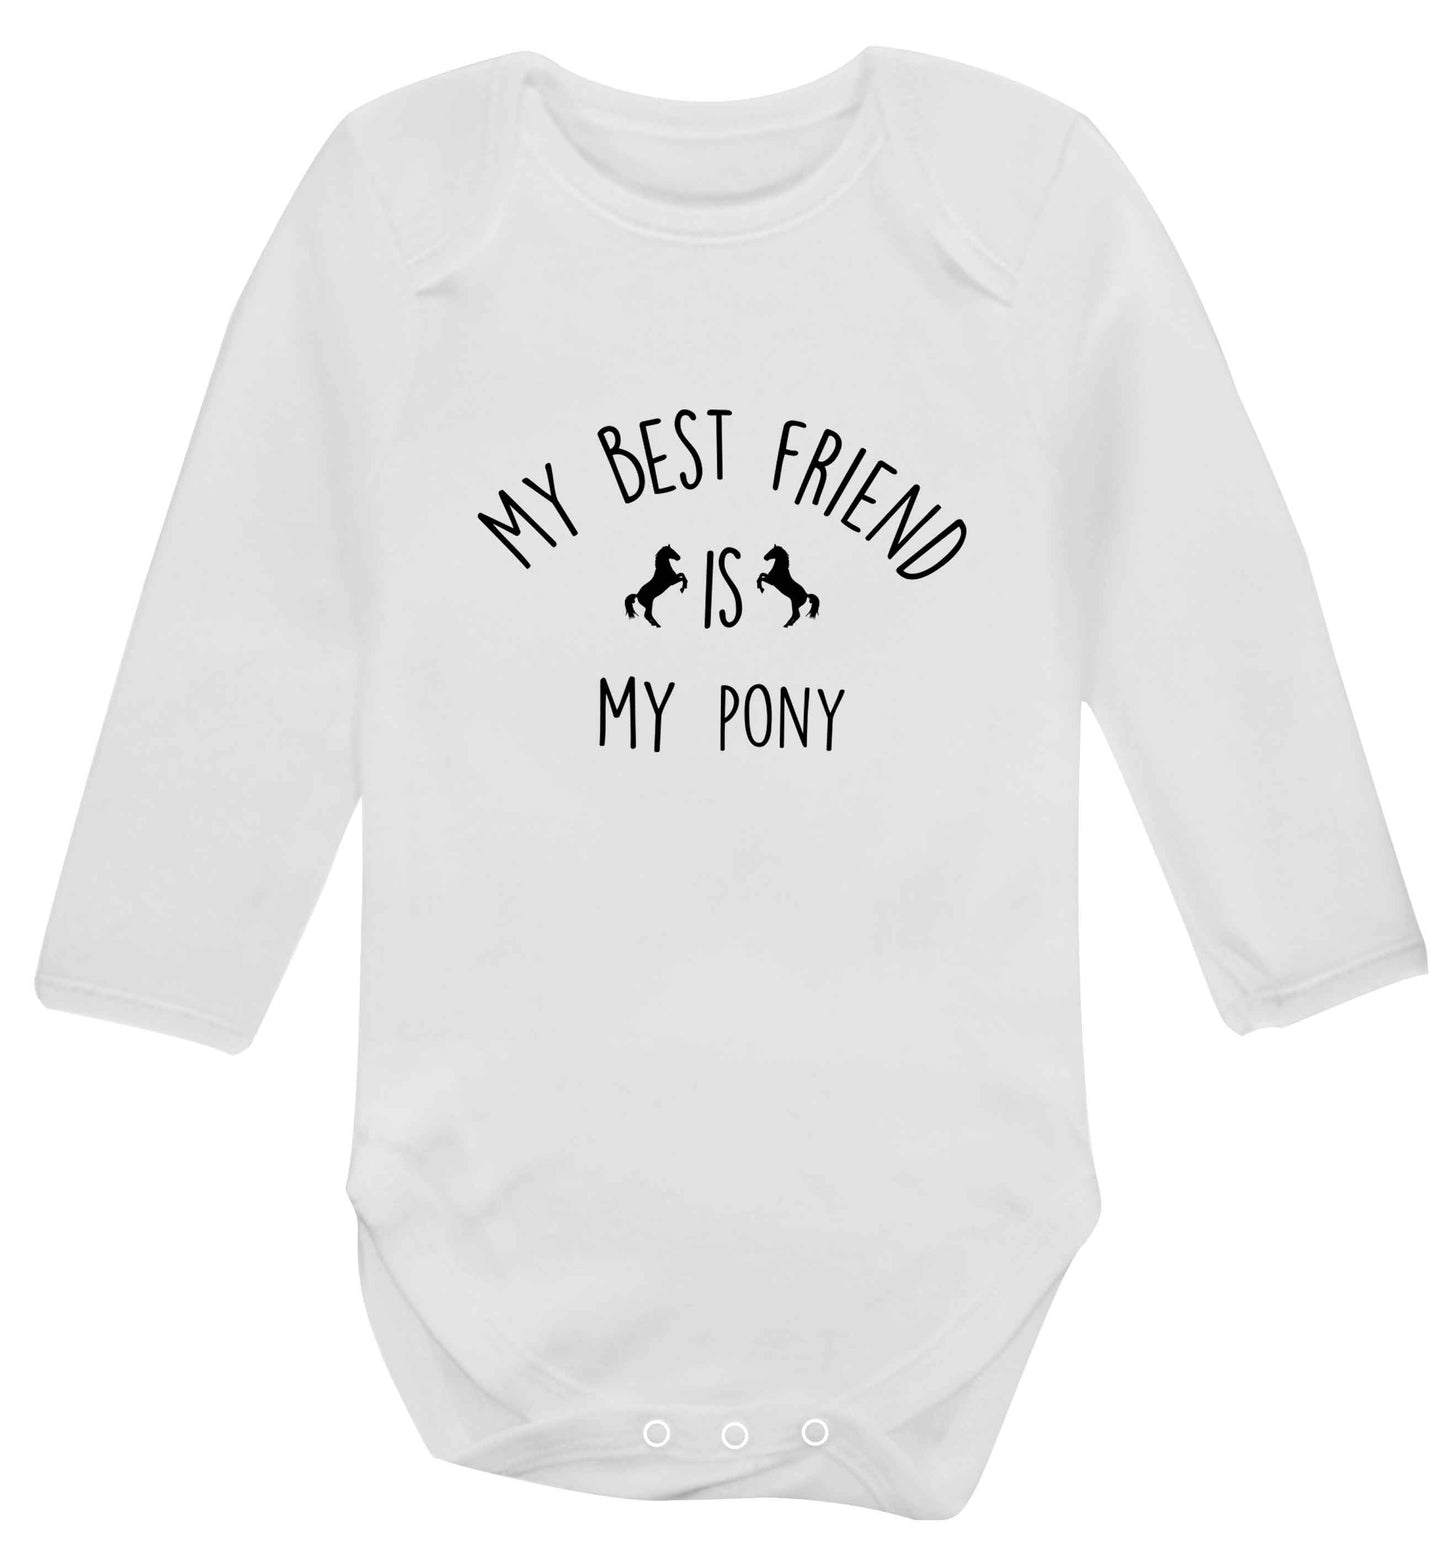 My best friend is my pony baby vest long sleeved white 6-12 months